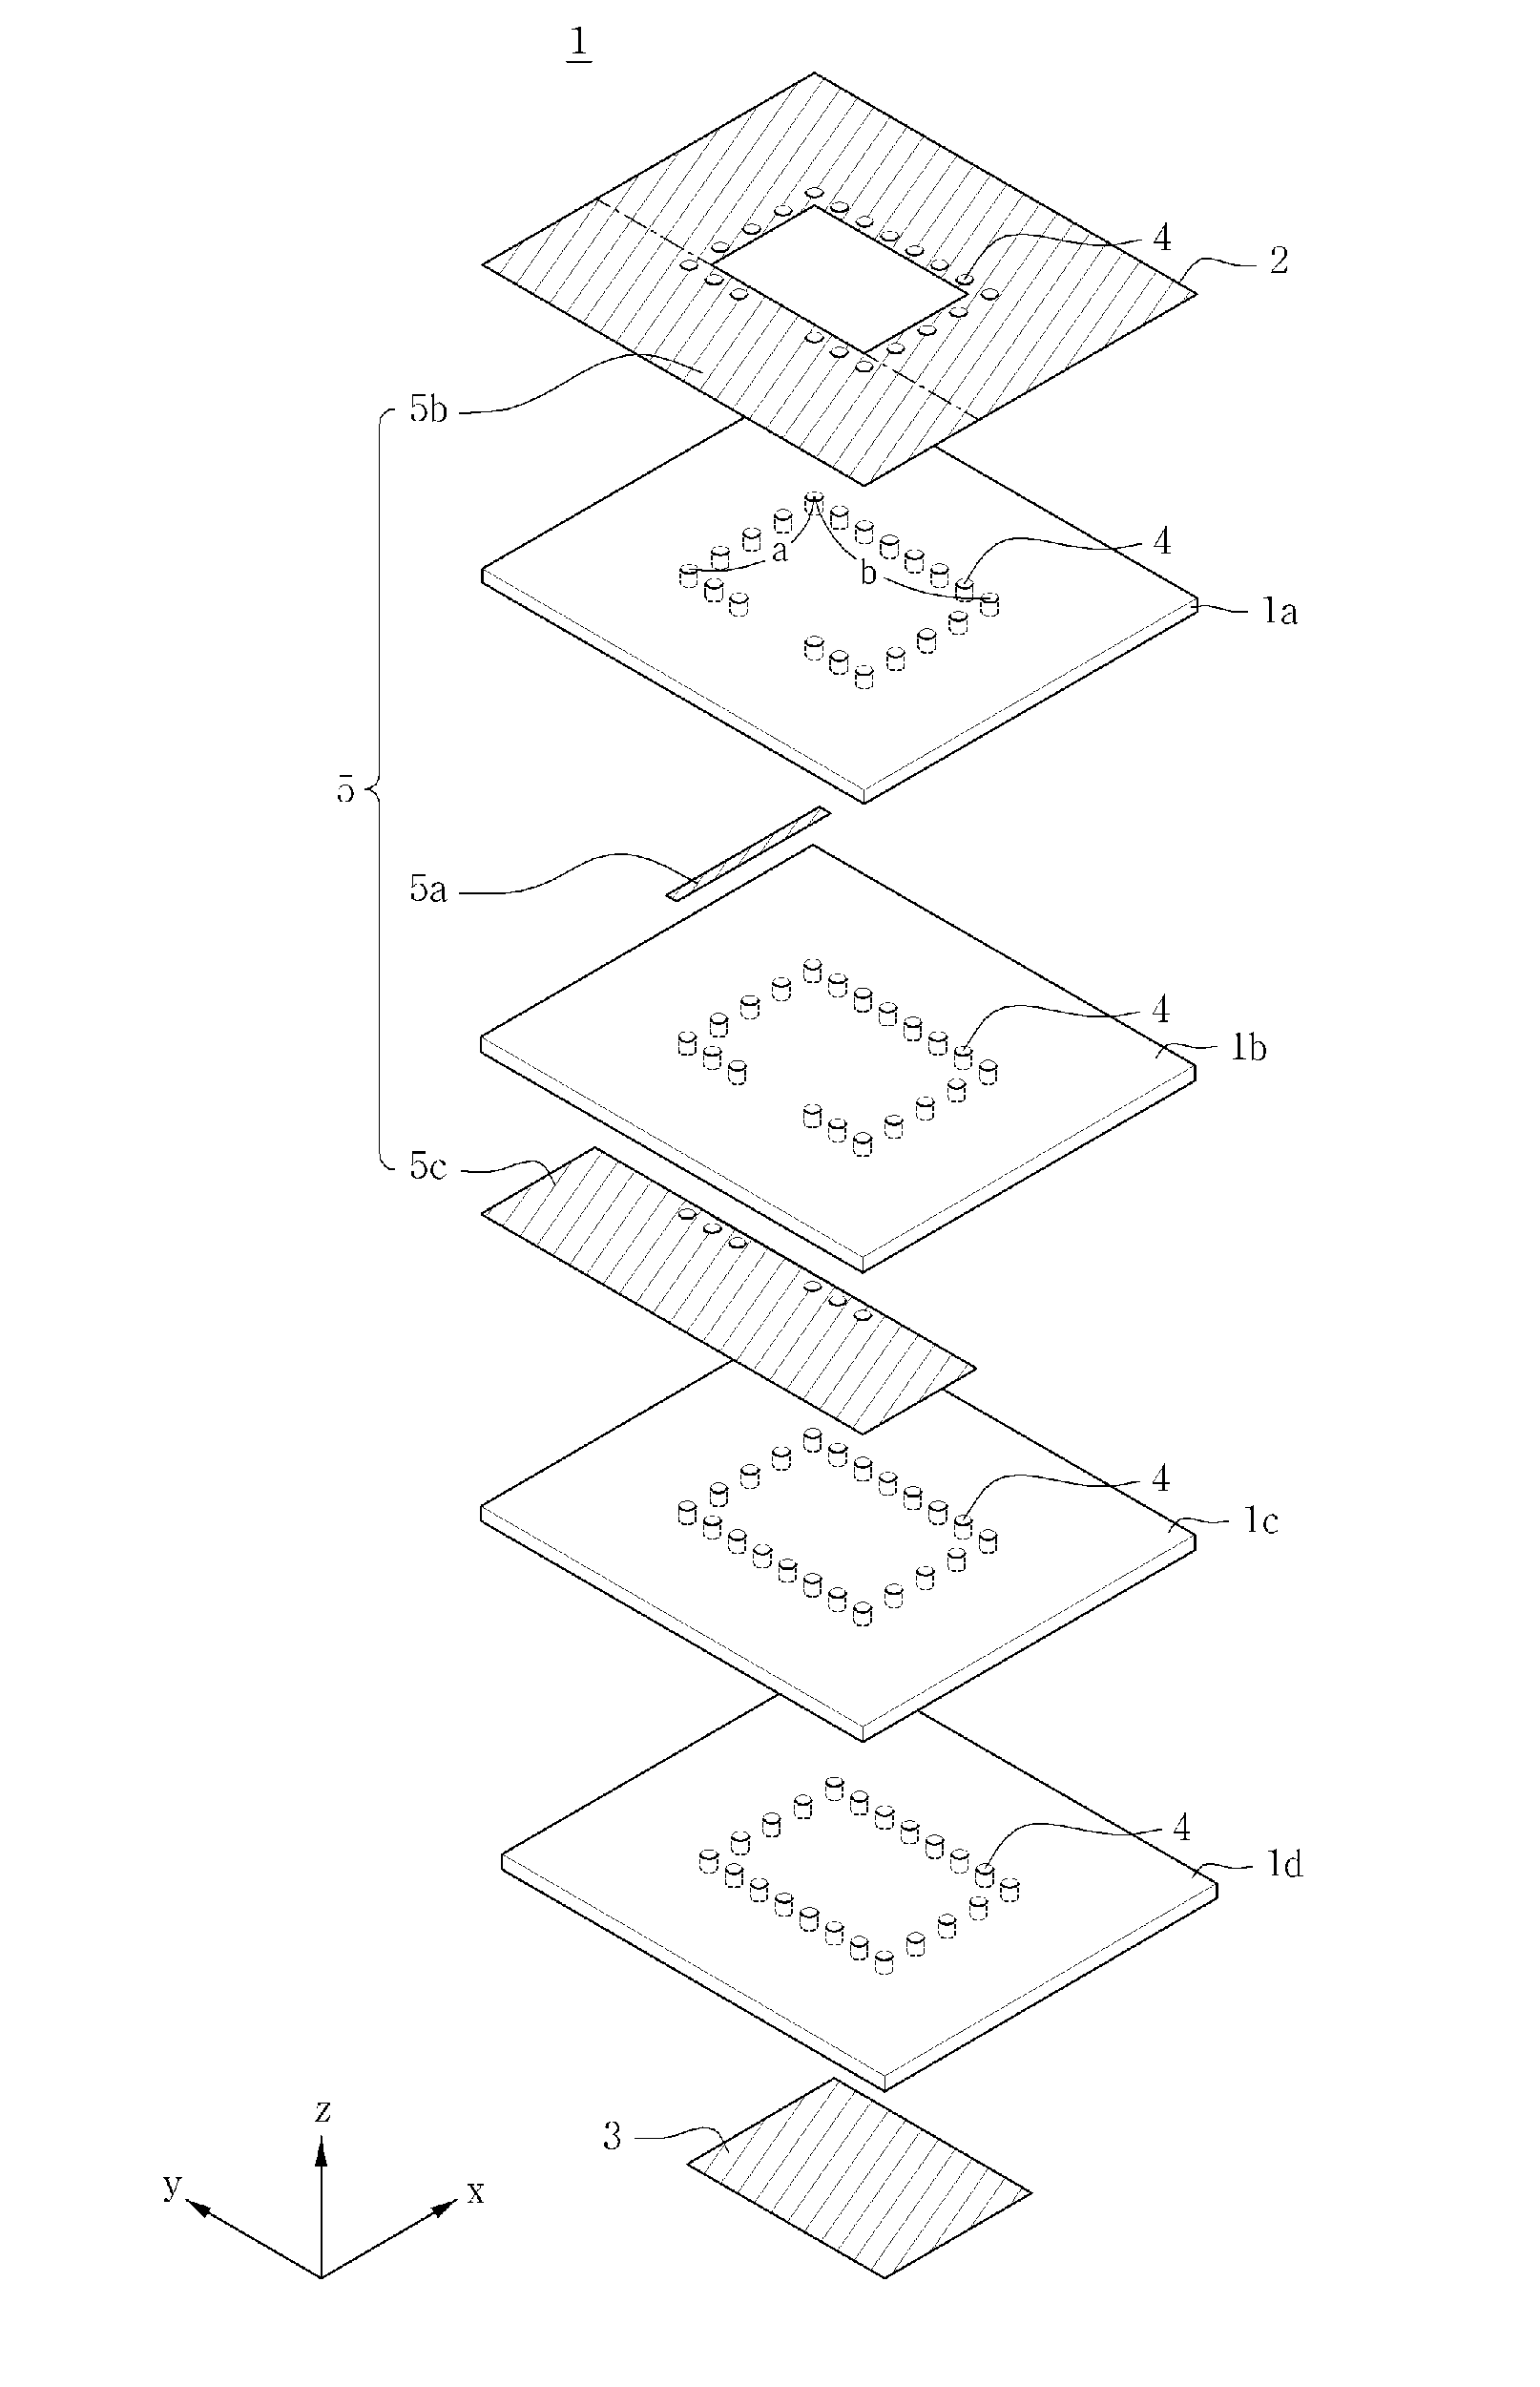 Dielectric resonator antenna embedded in multilayer substrate